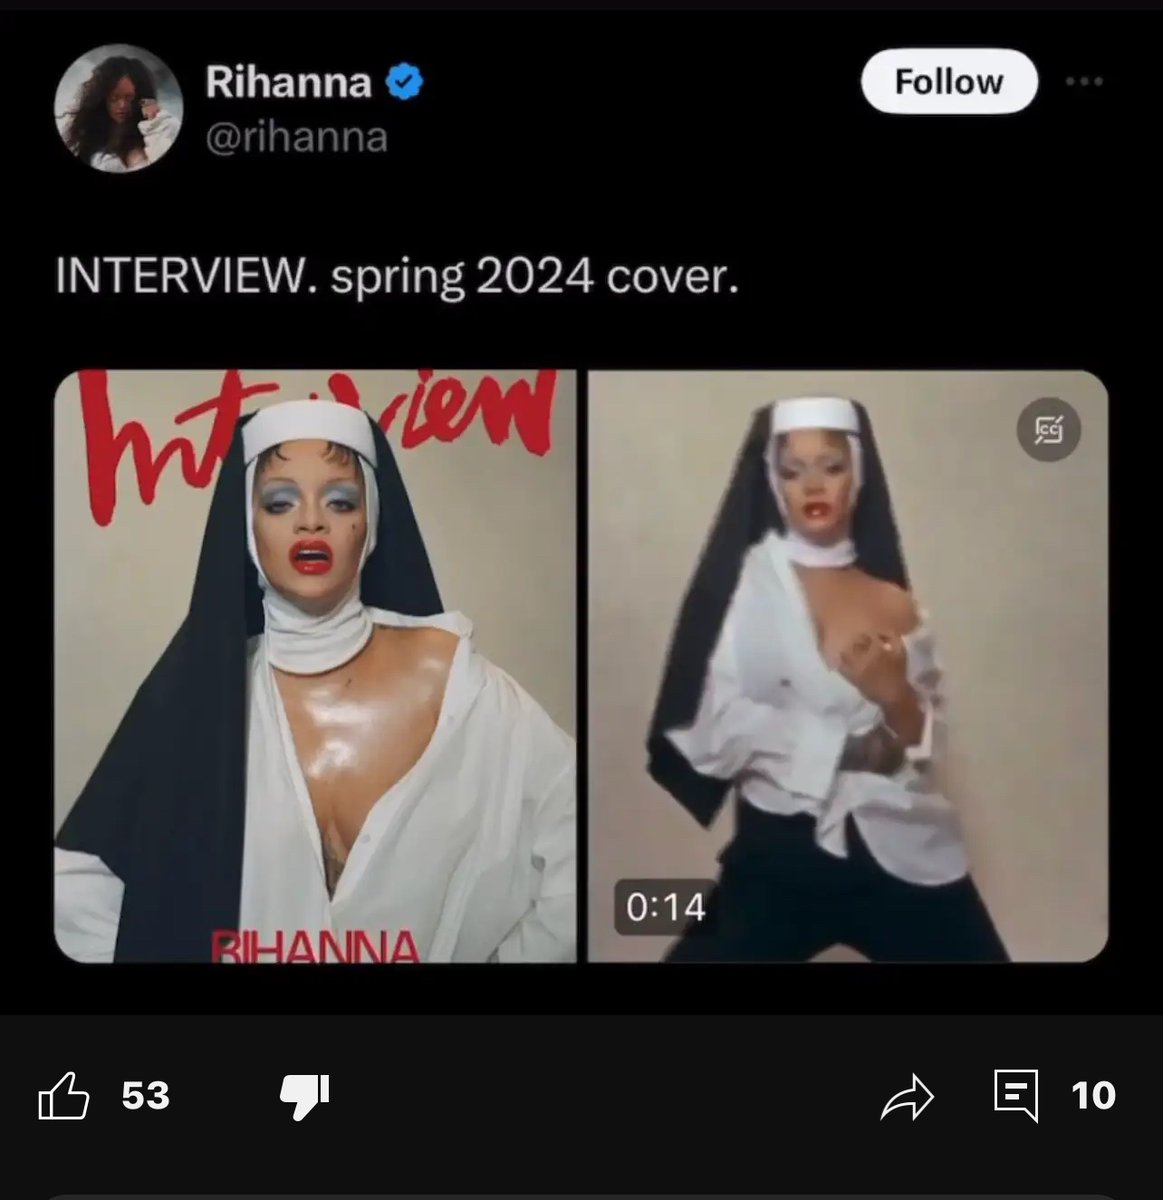 You tacky revolting disgusting bitch @rihanna Now do it with a hijab.